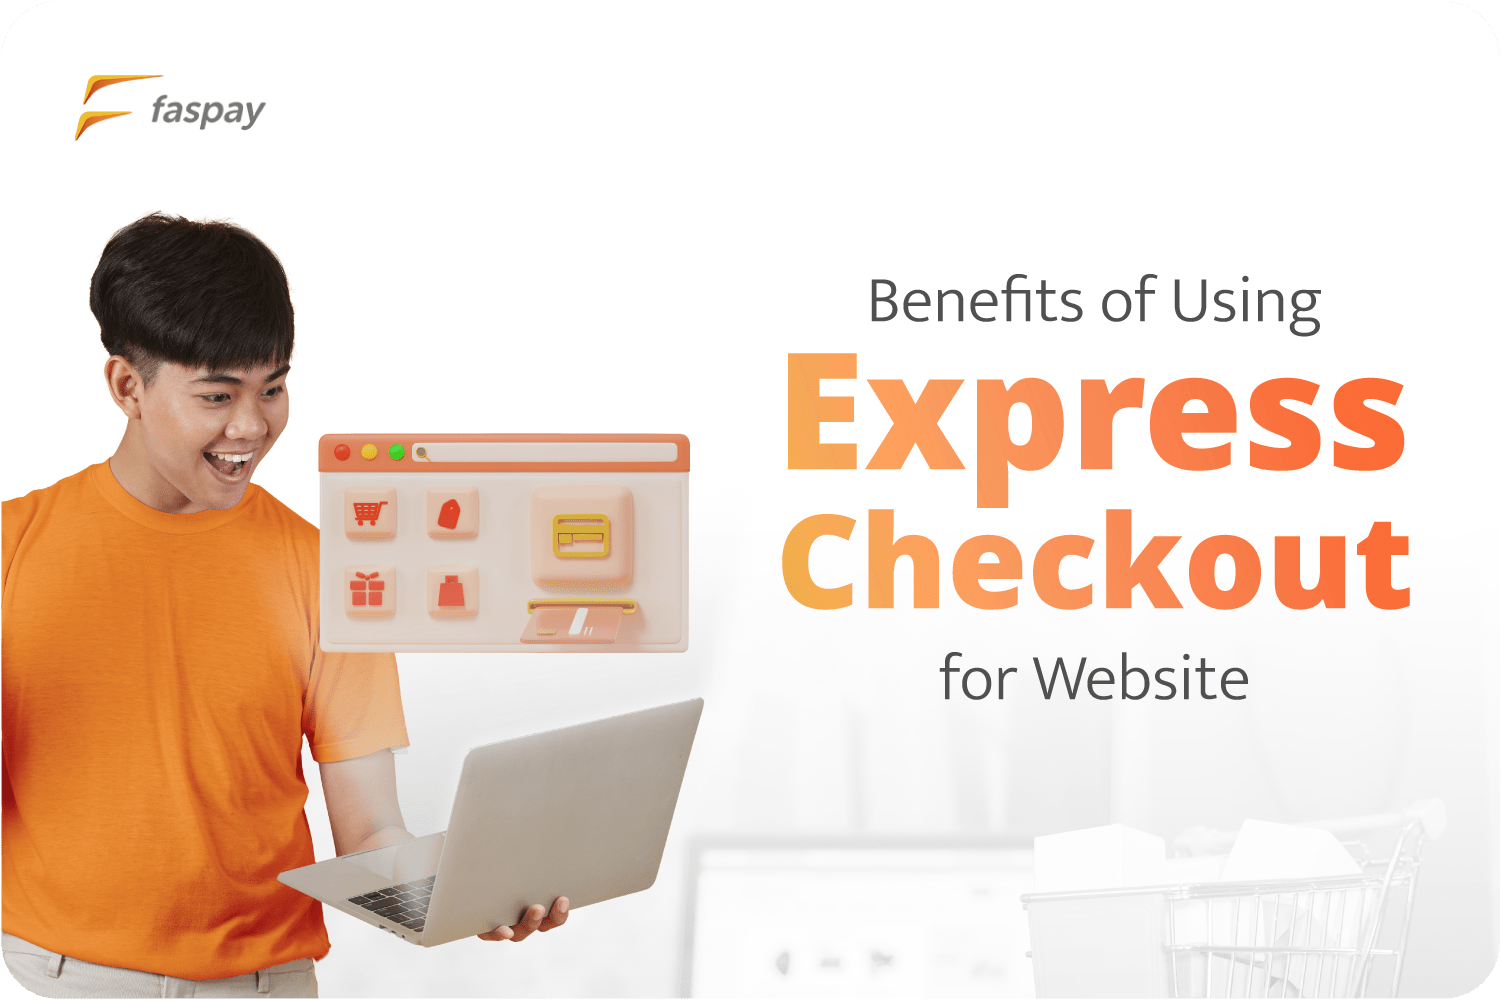 Express Checkout For Websites